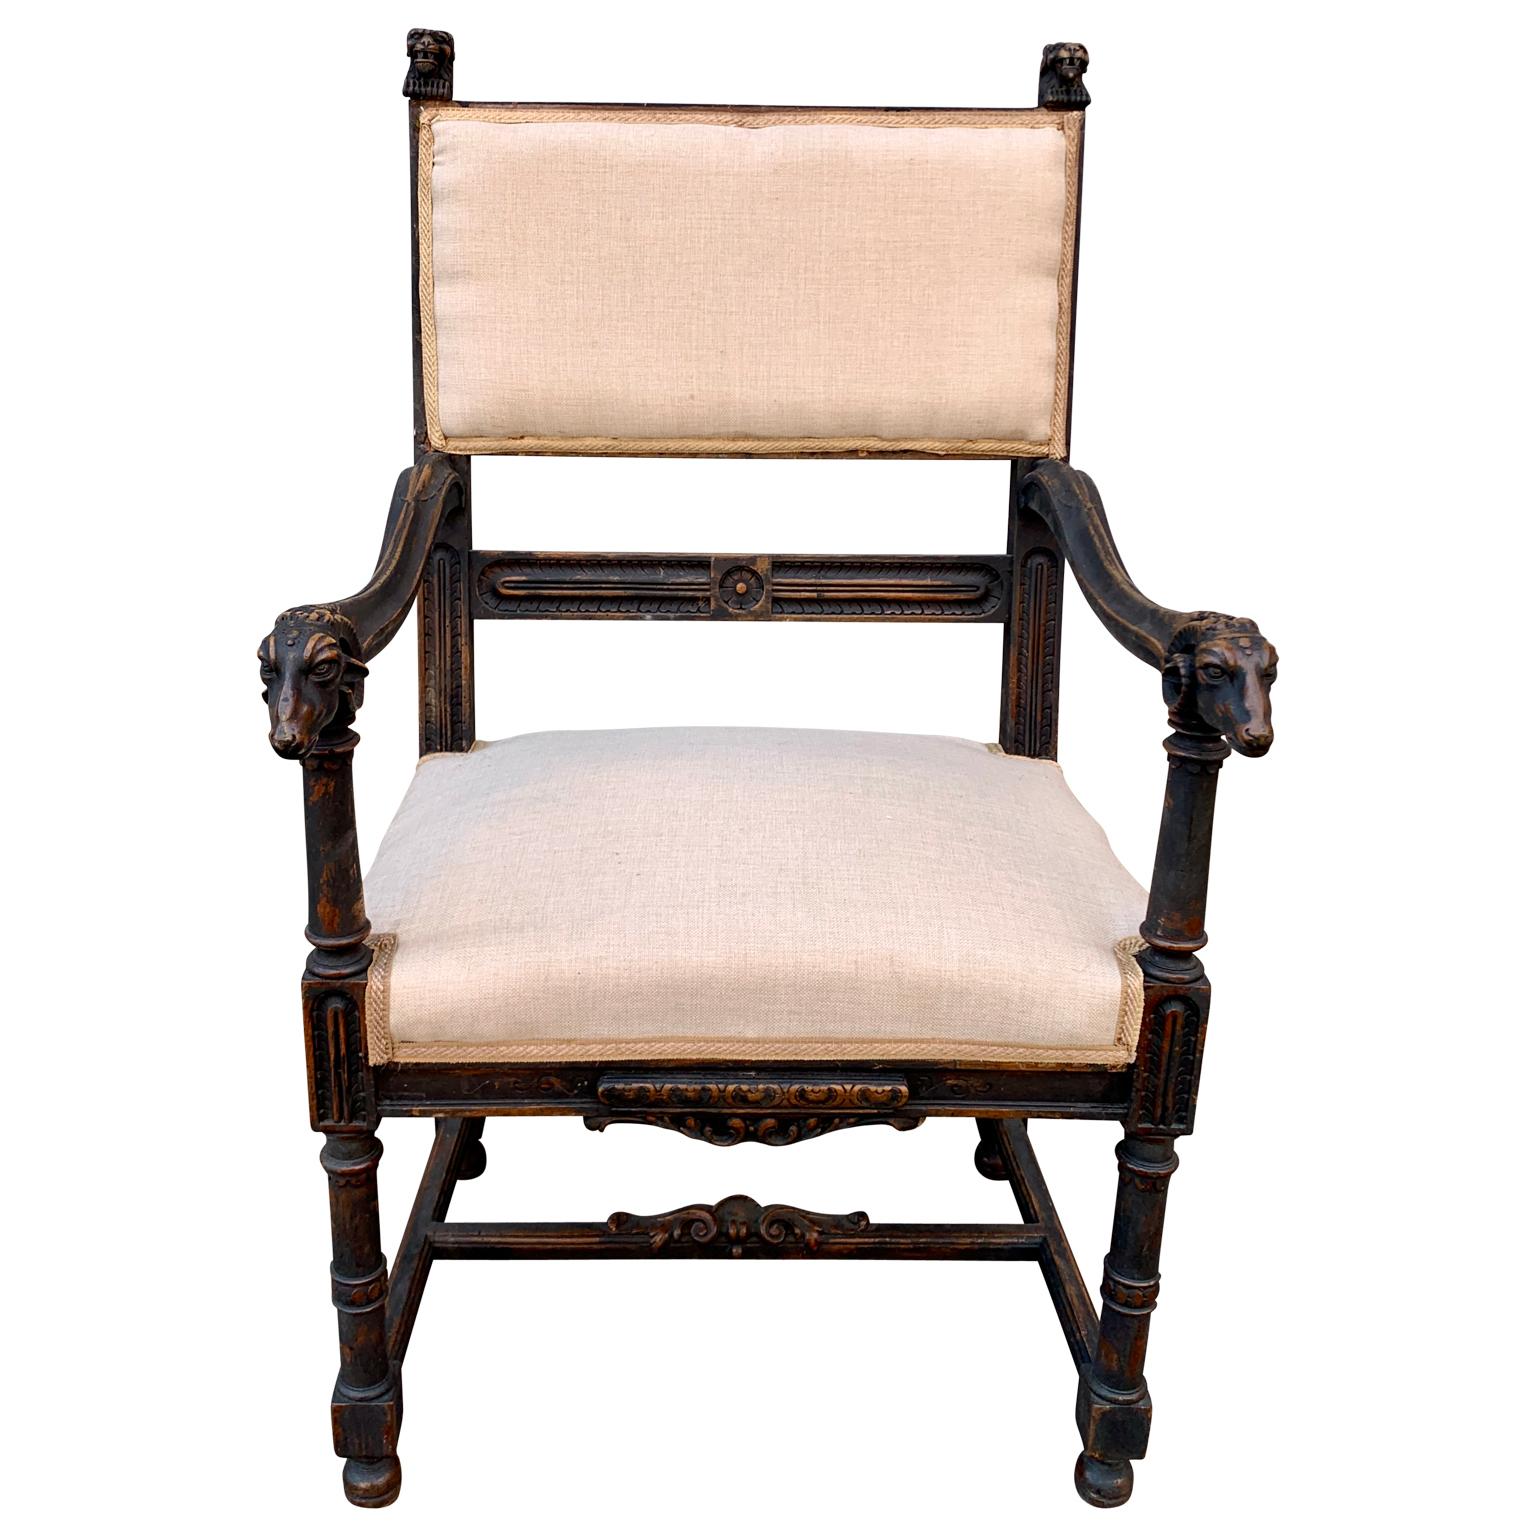 Late 19th Century French writing desk armchair painted in black, in solid oak wood. This richly sculptured armchair from Gothic revival period, is decorated with rams head on the armrest and lions head on the top of the back.